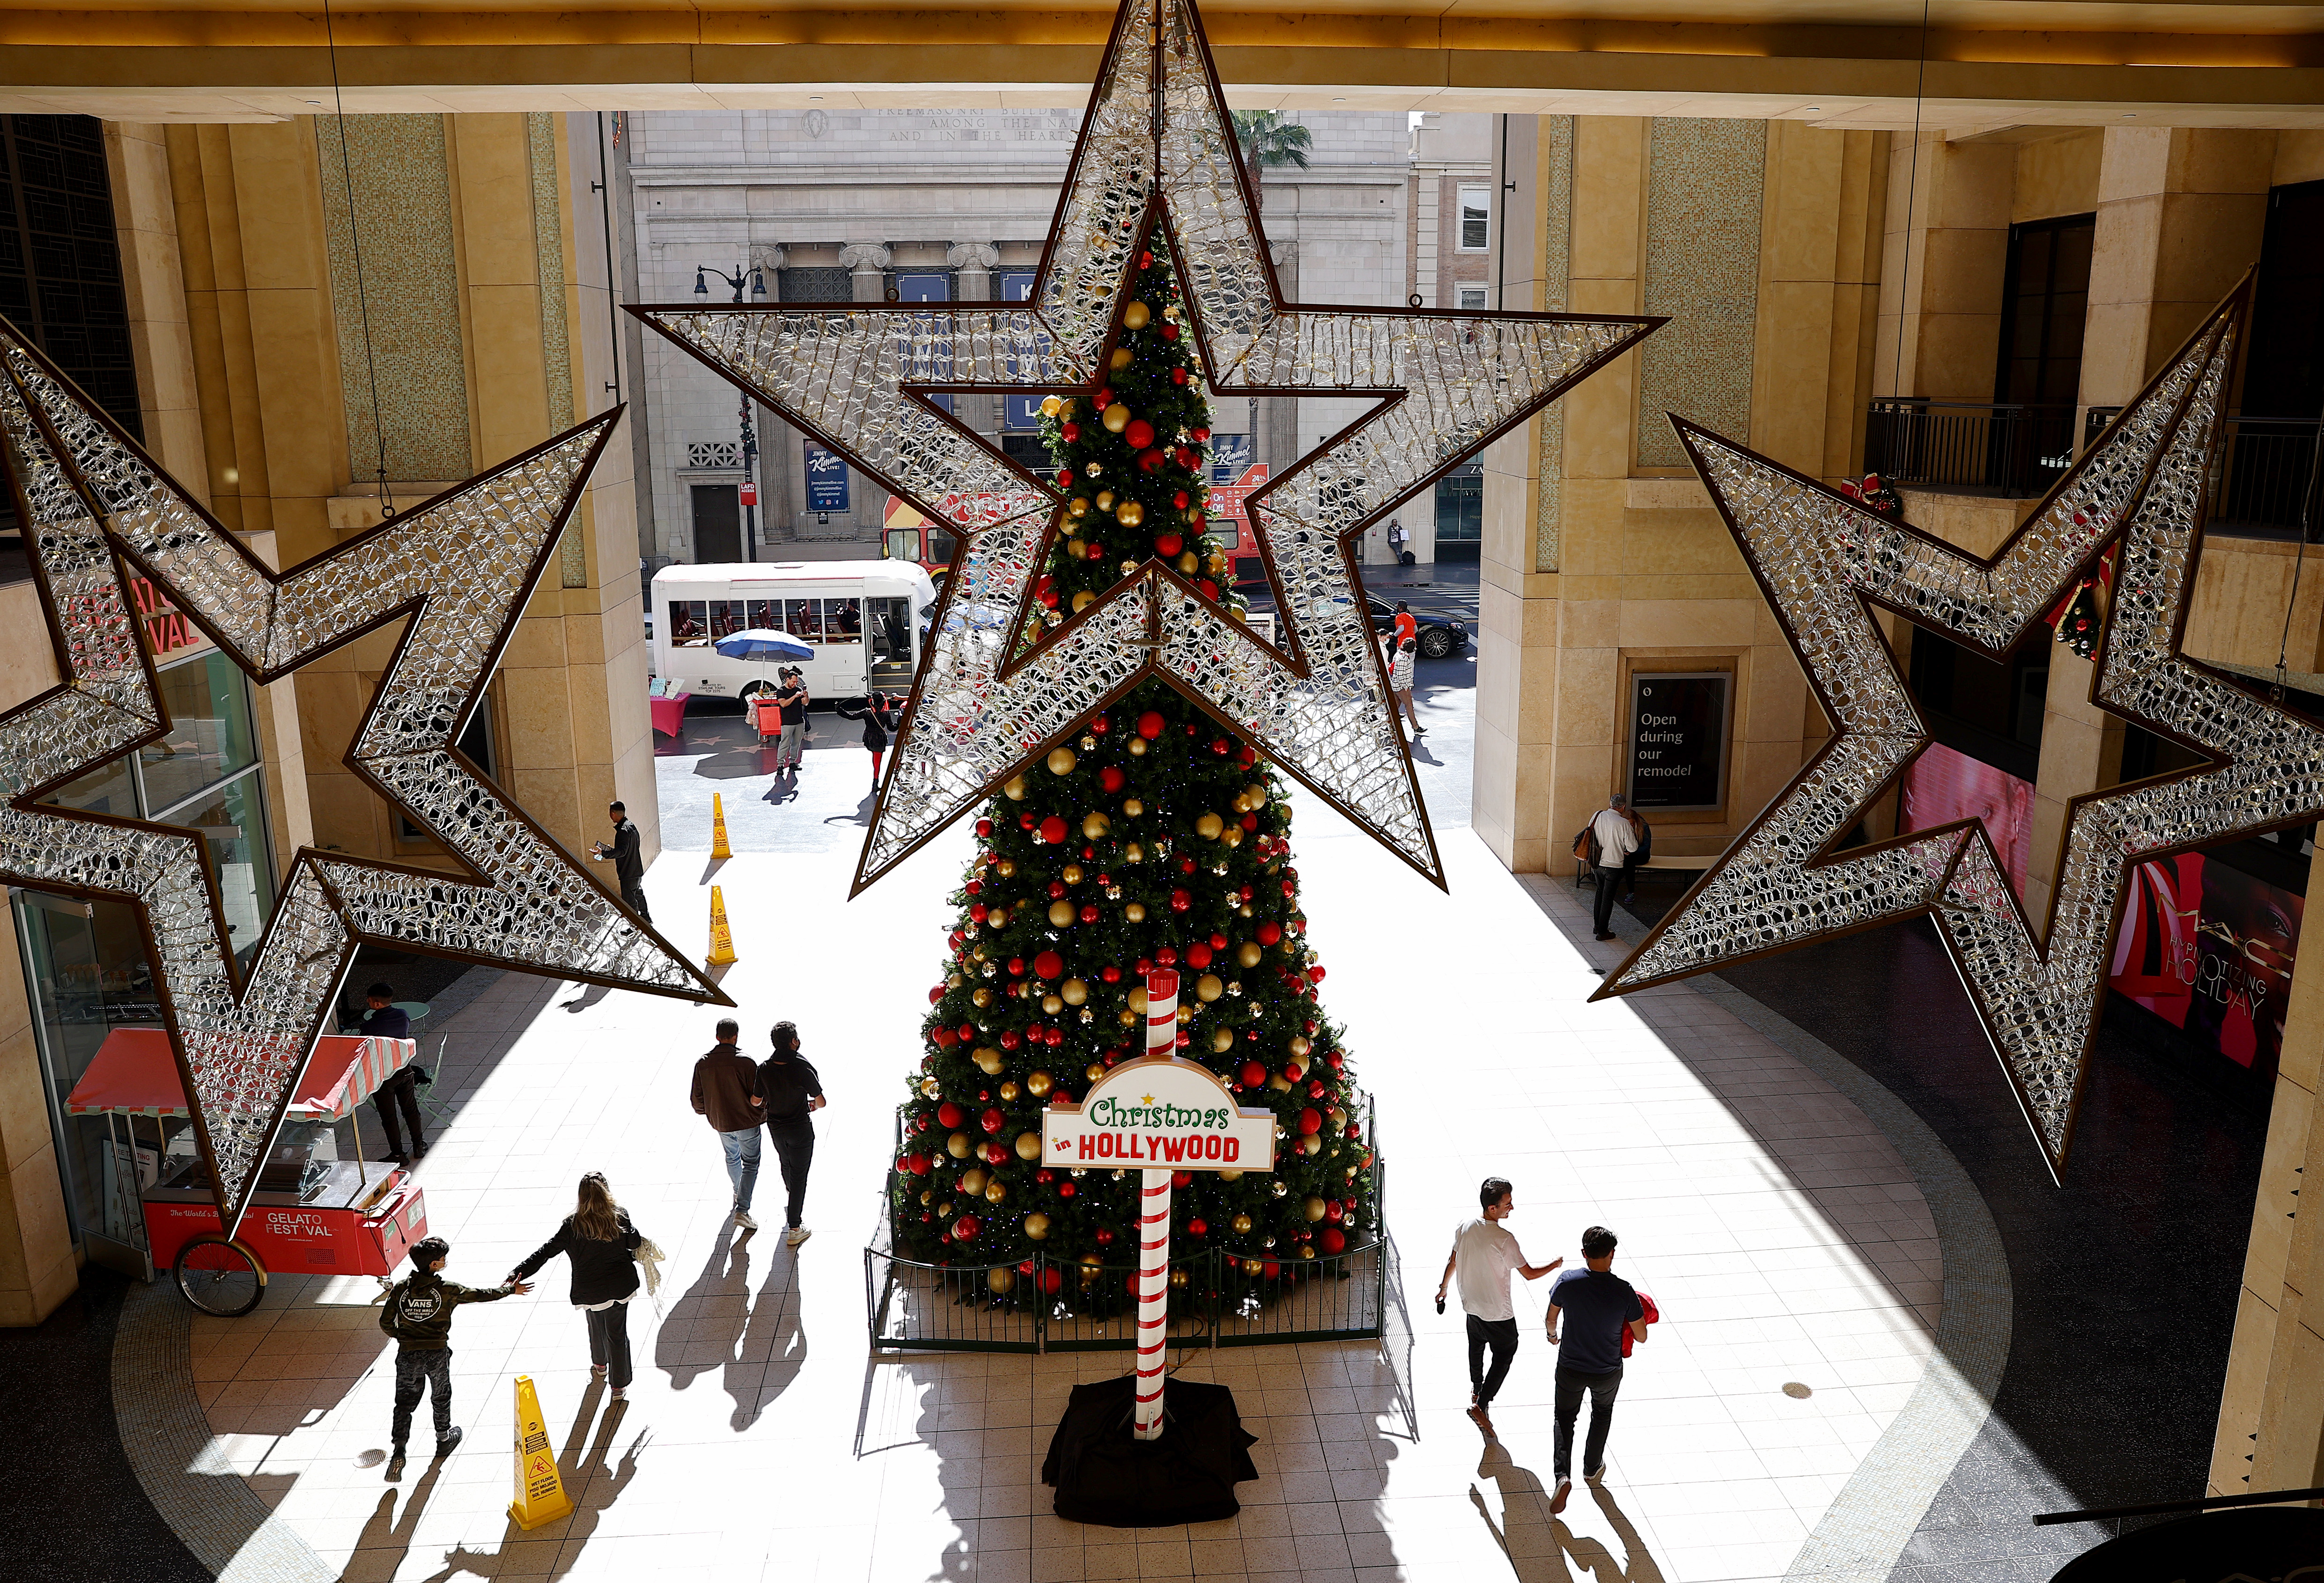 A Christmas tree at Hollywood & Highland in Los Angeles, California on December 17, 2021 | Source: Getty Images